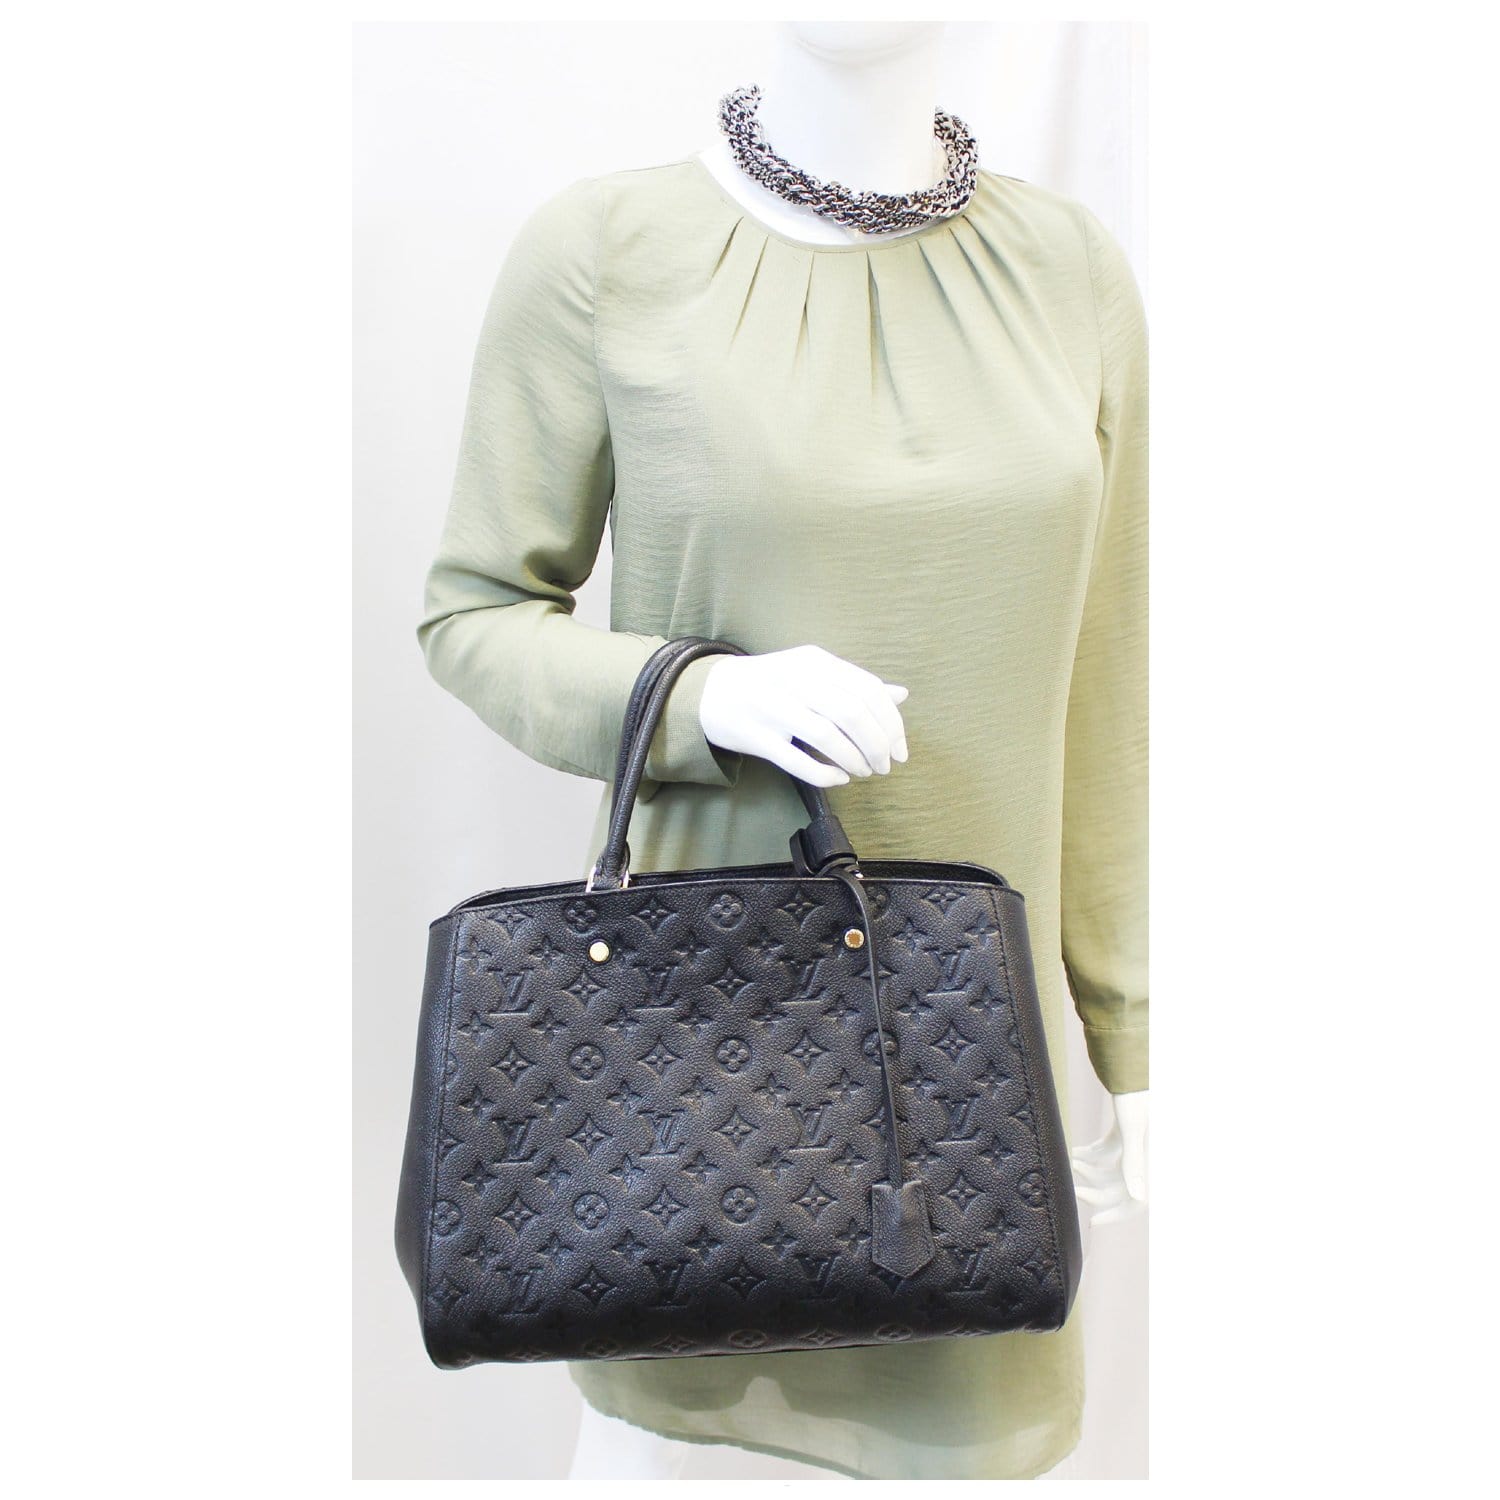 e-glampot.com on Instagram: 7089-39 L V Empreinte Noir Montaigne GM Bag  Date code: SP0156 Condition: 8/10 Good Remarks: Used in good condition;  bag's e xterior and interior in pristine condition, h owever